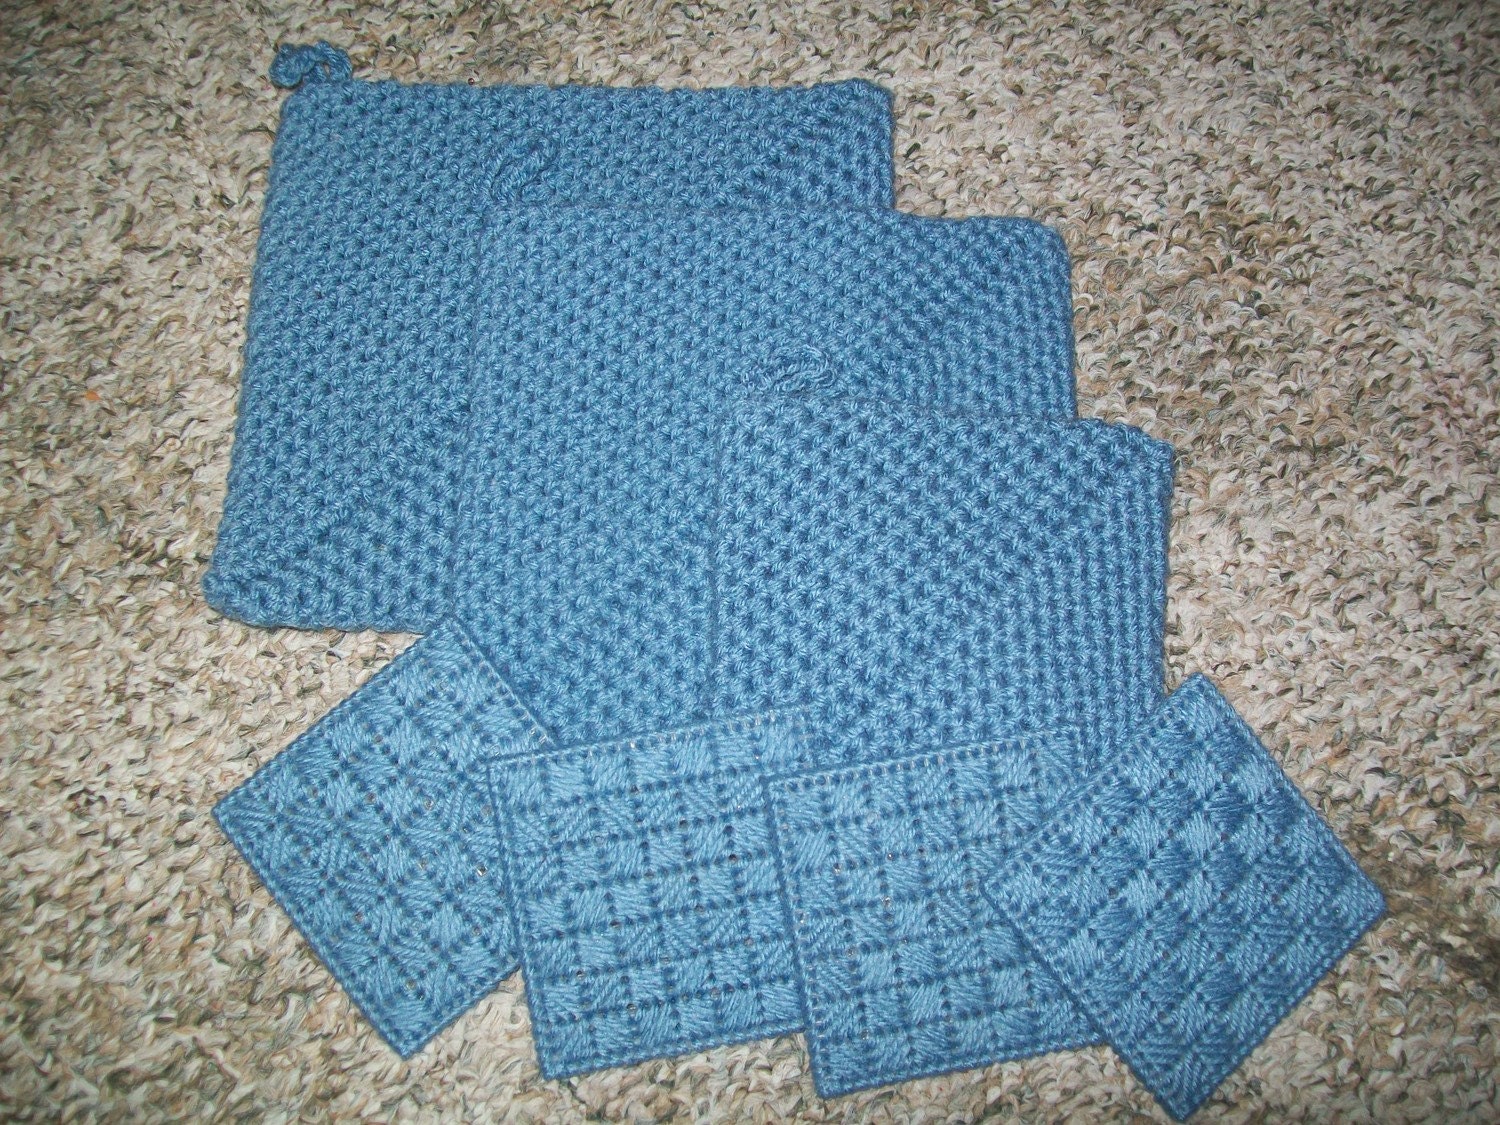 Hot Pad and Coaster Set in Country Blue